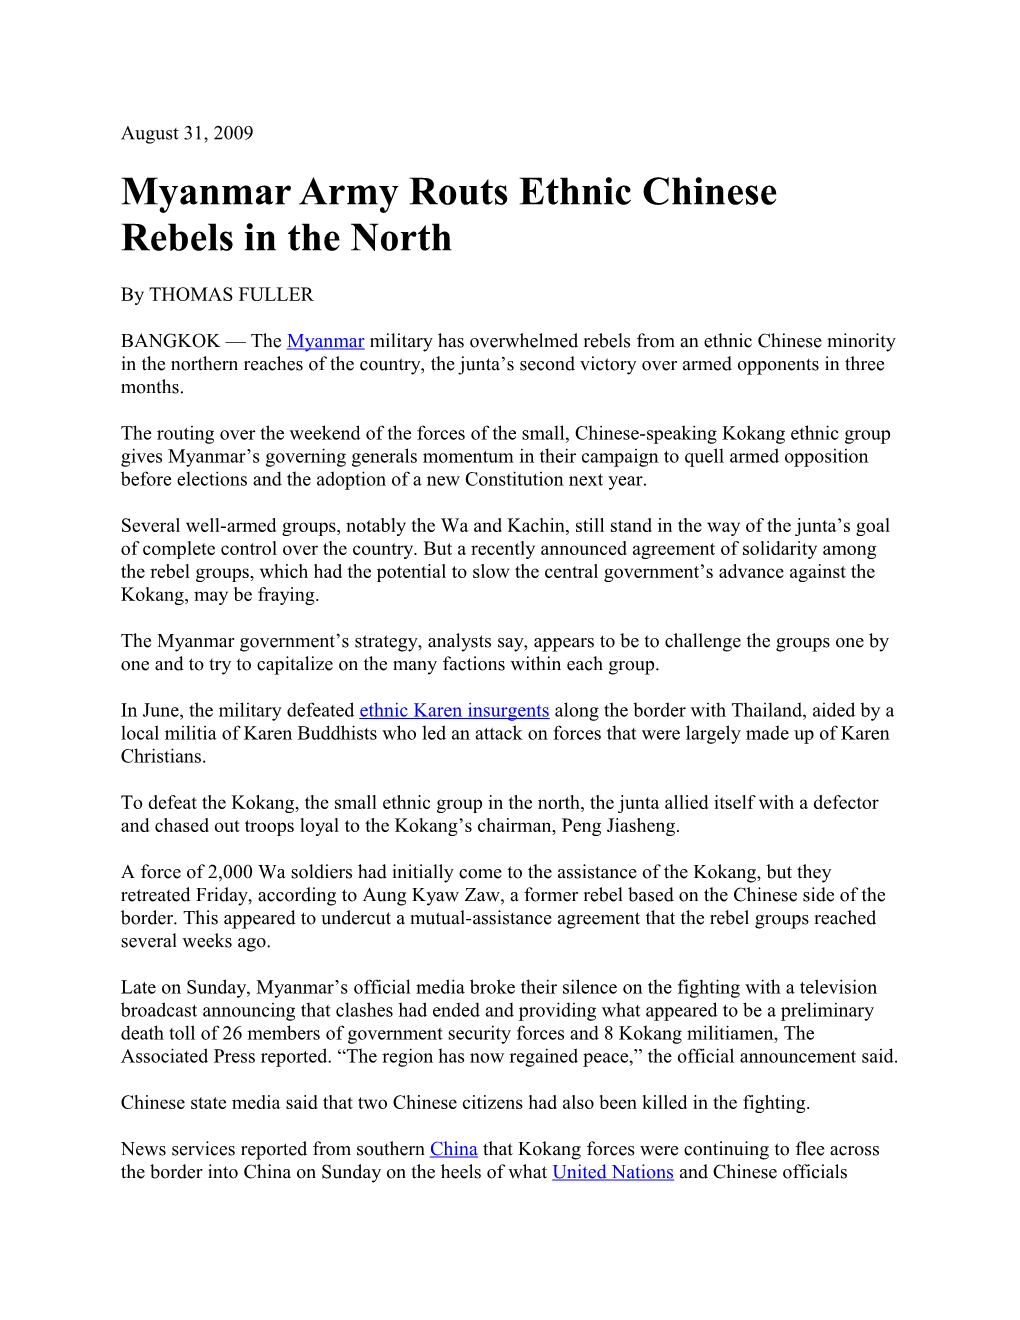 Myanmar Army Routs Ethnic Chinese Rebels in the North